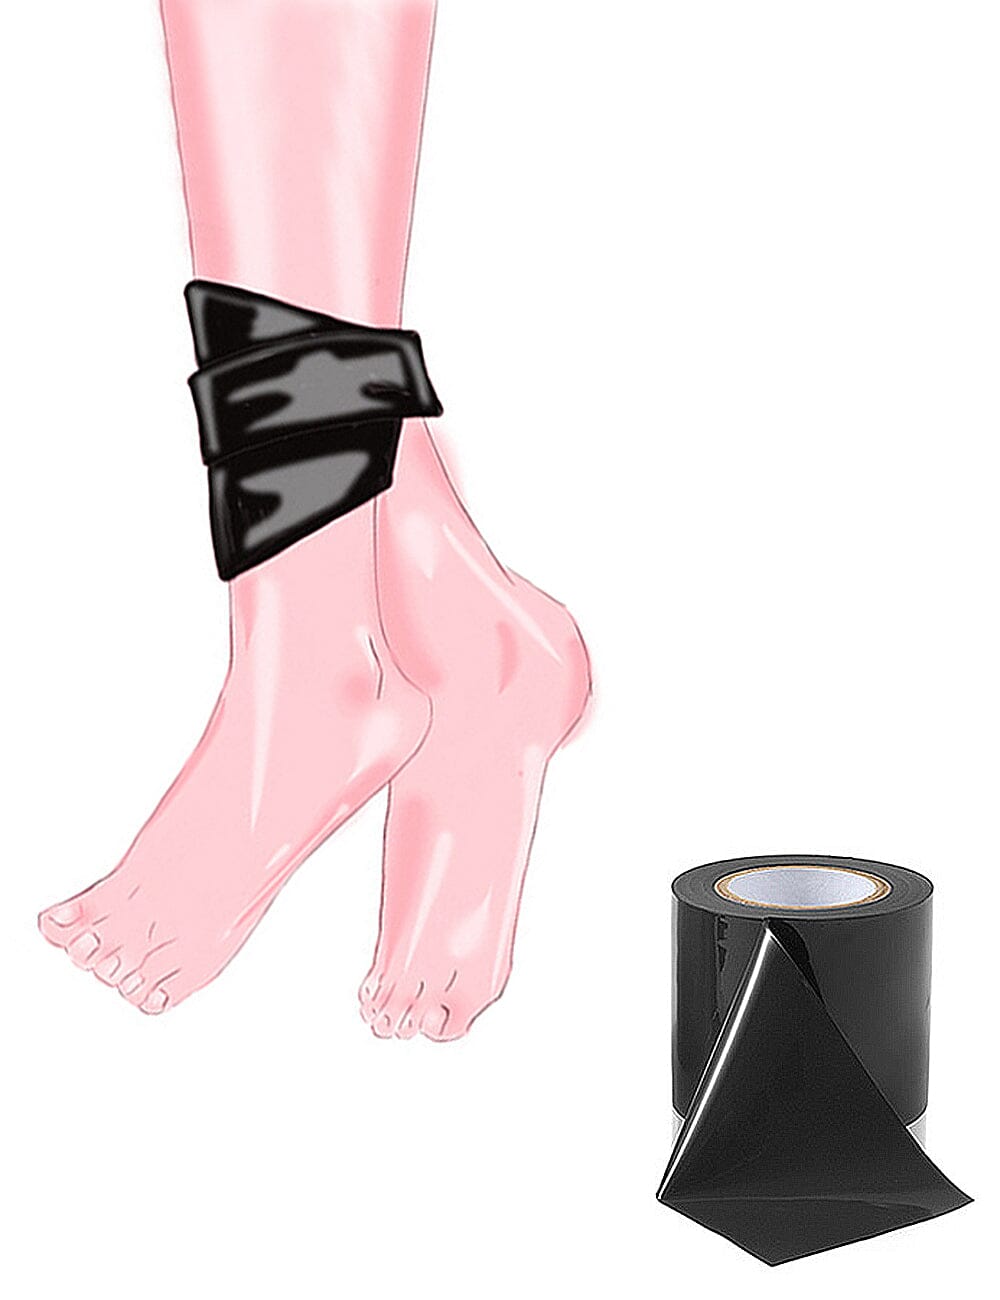 a drawing of a woman's bare feet with a black tape